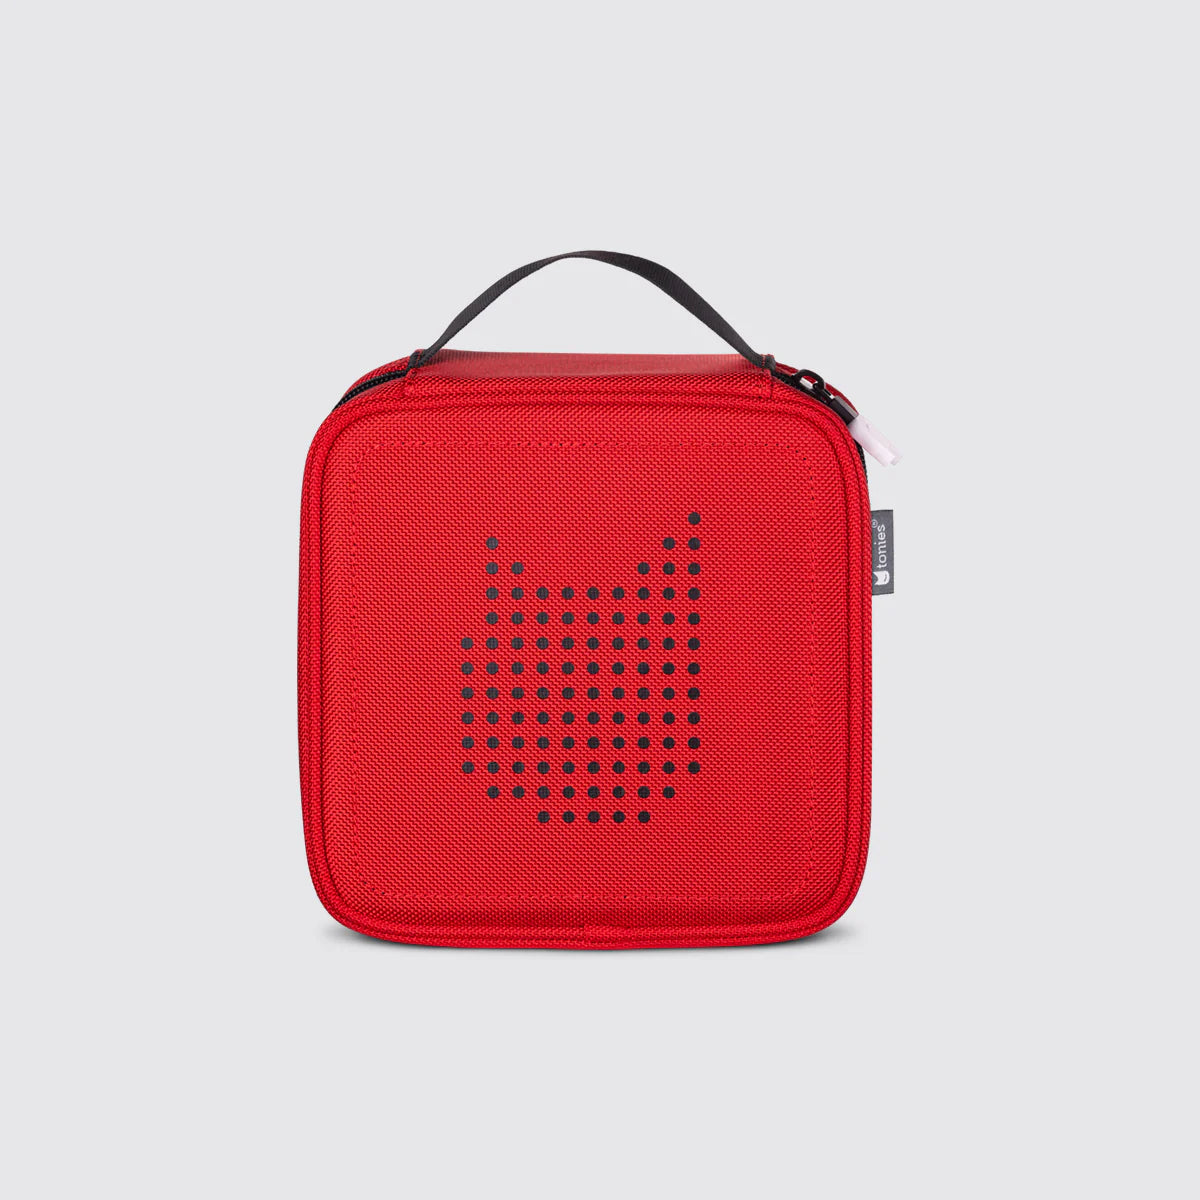 Tonie Carrying Case- Red by Tonies #10001201